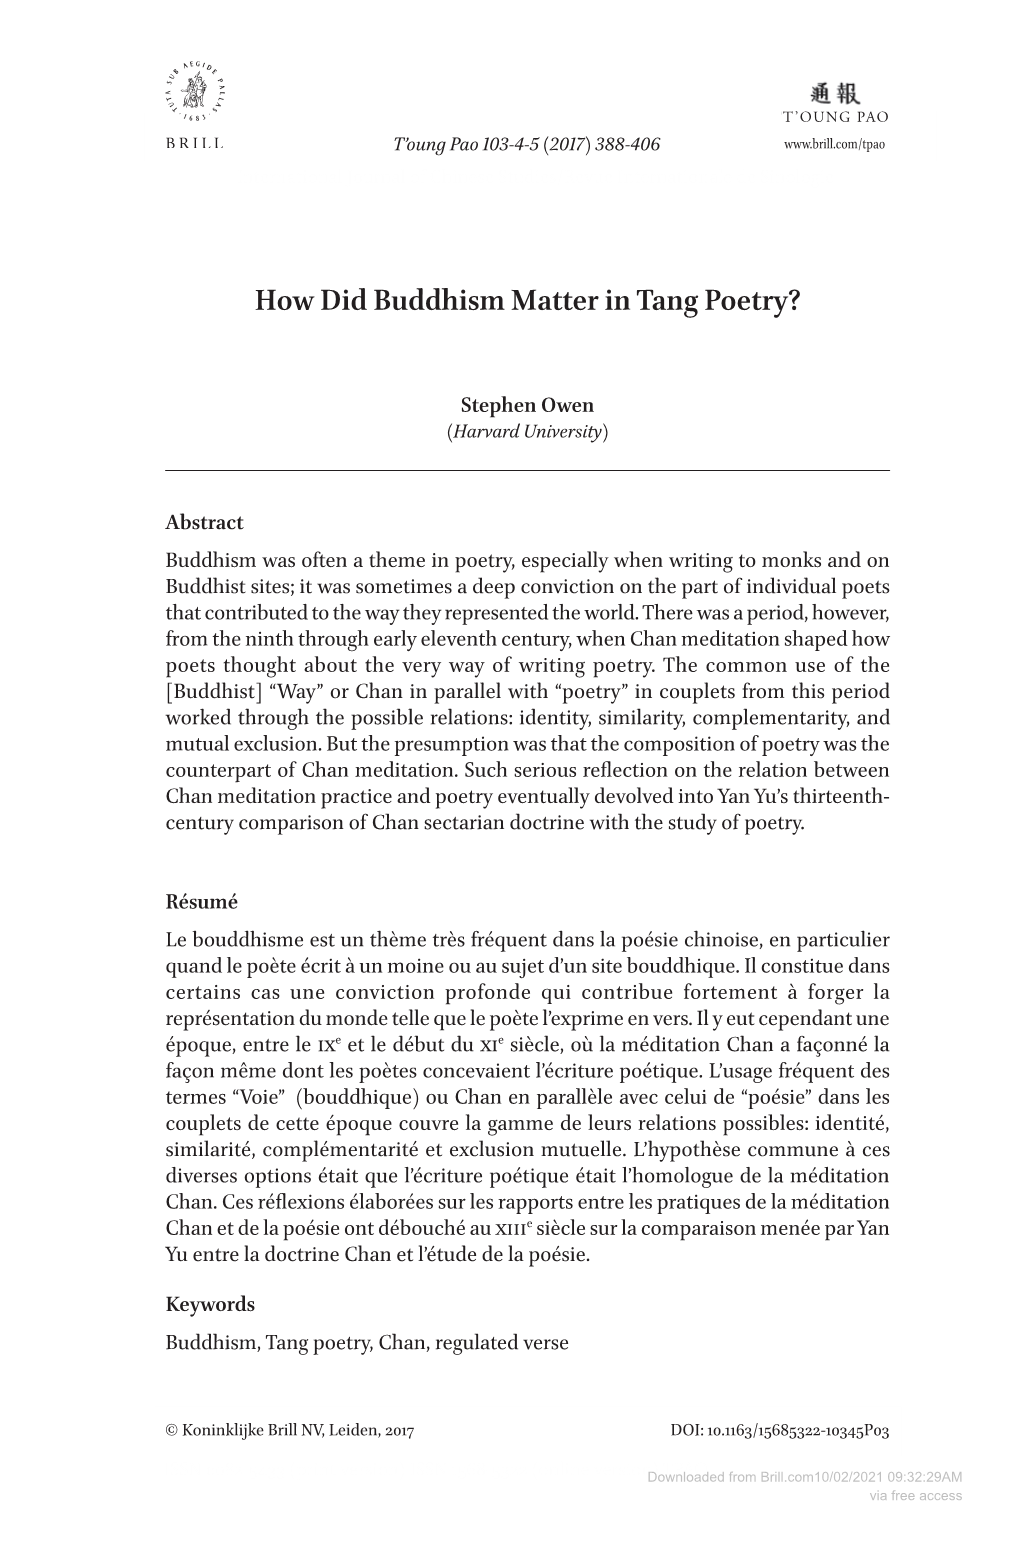 How Did Buddhism Matter in Tang Poetry?